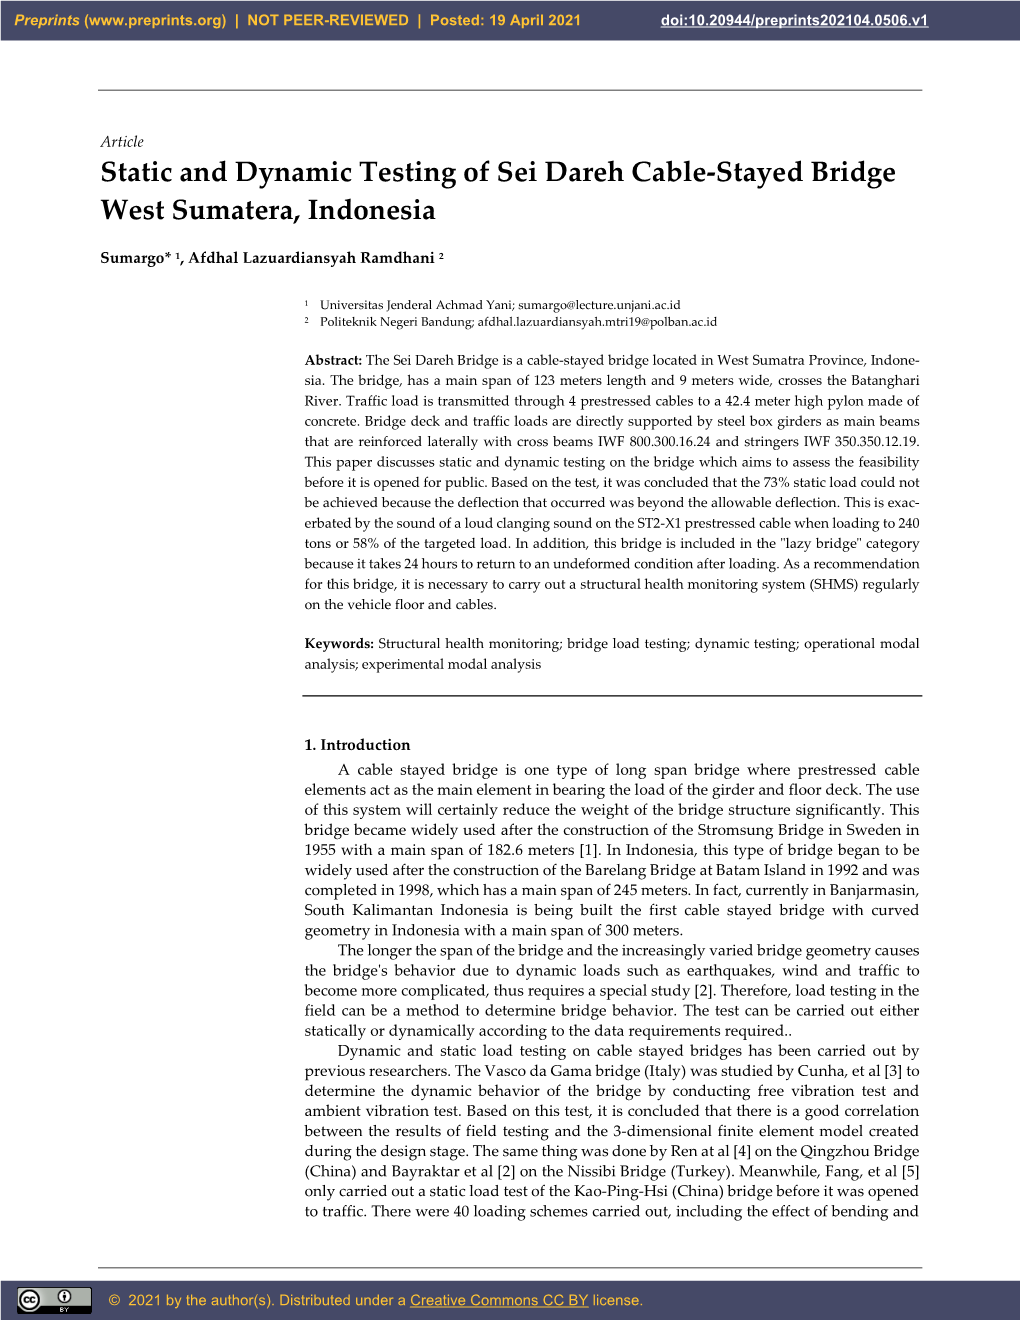 Static and Dynamic Testing of Sei Dareh Cable-Stayed Bridge West Sumatera, Indonesia